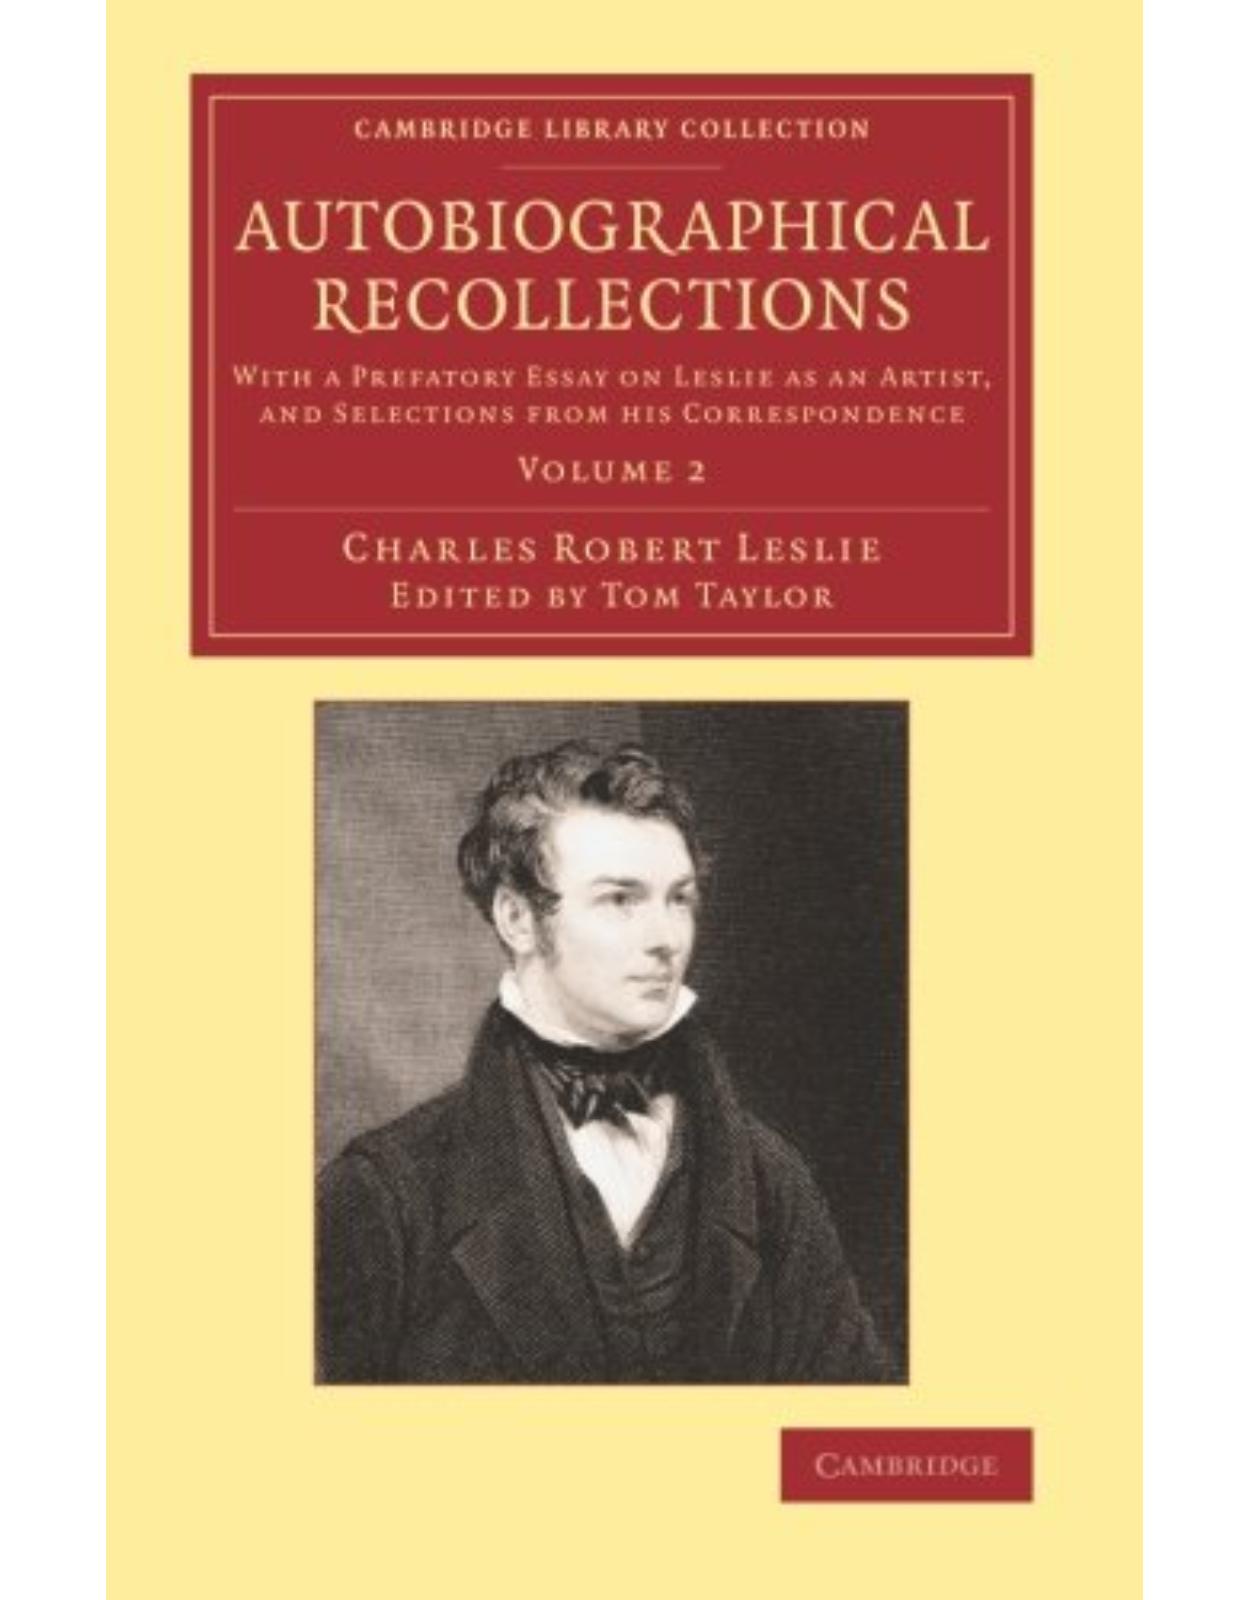 Autobiographical Recollections: With a Prefatory Essay on Leslie as an Artist, and Selections from his Correspondence